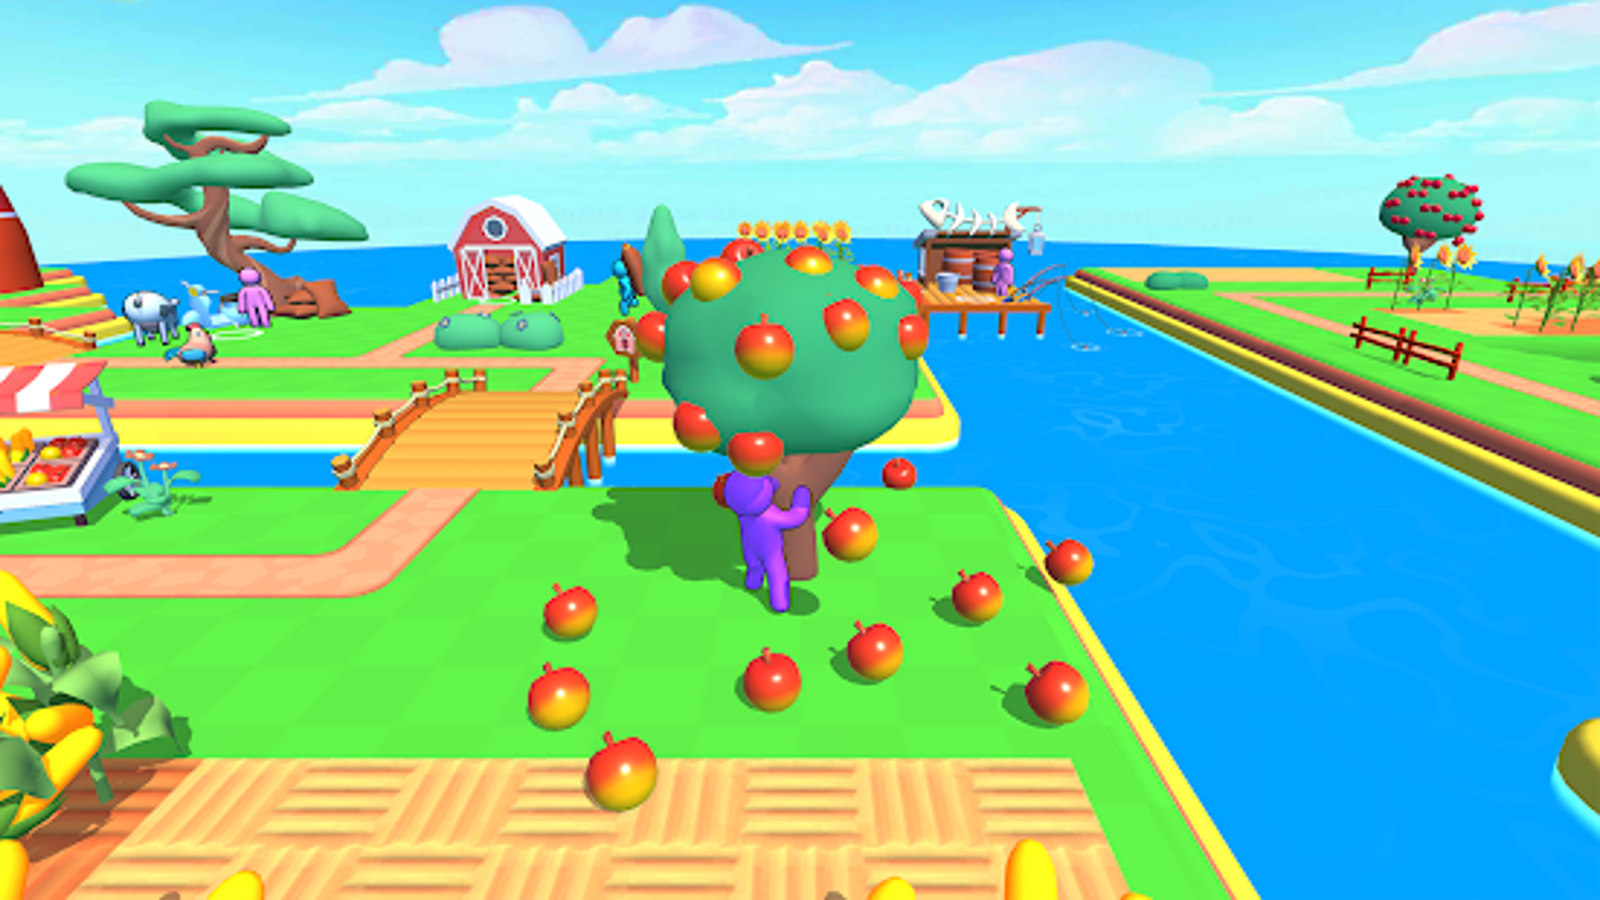 Screenshot from Farm Land, showing a purple sprite harvesting apples from a tree